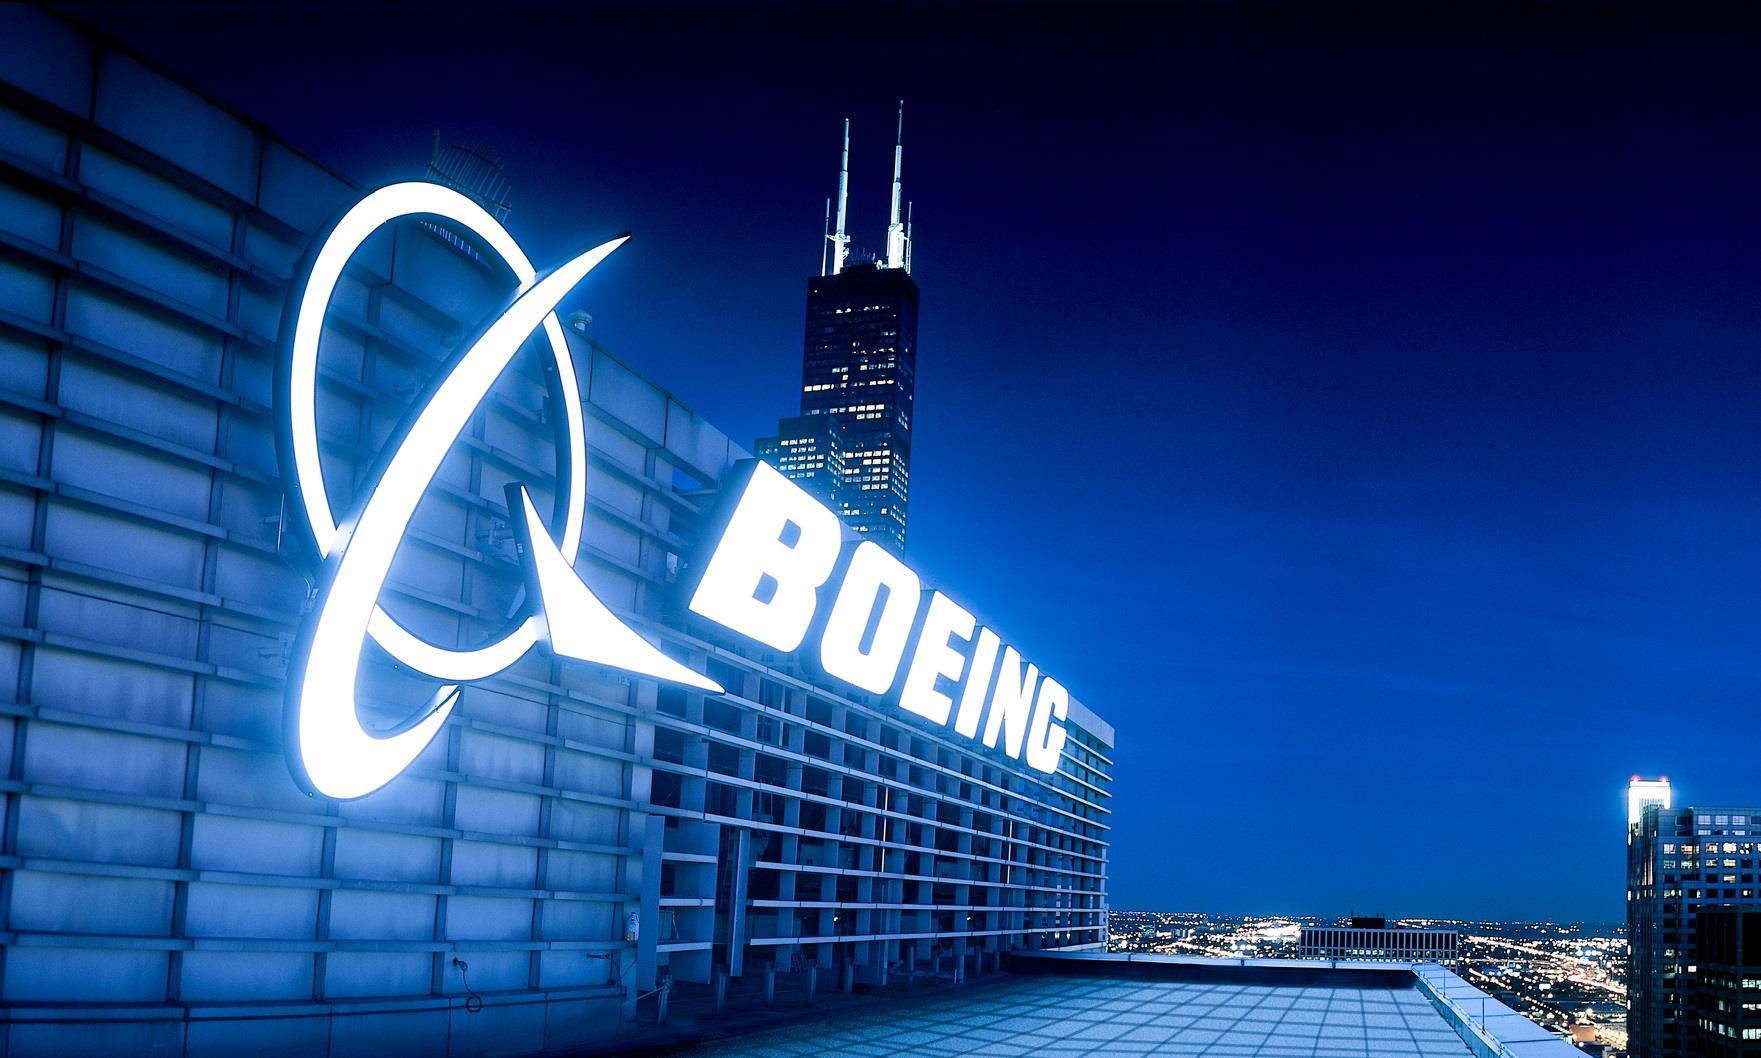 Boeing intends to move headquarters to Arlington from Chicago